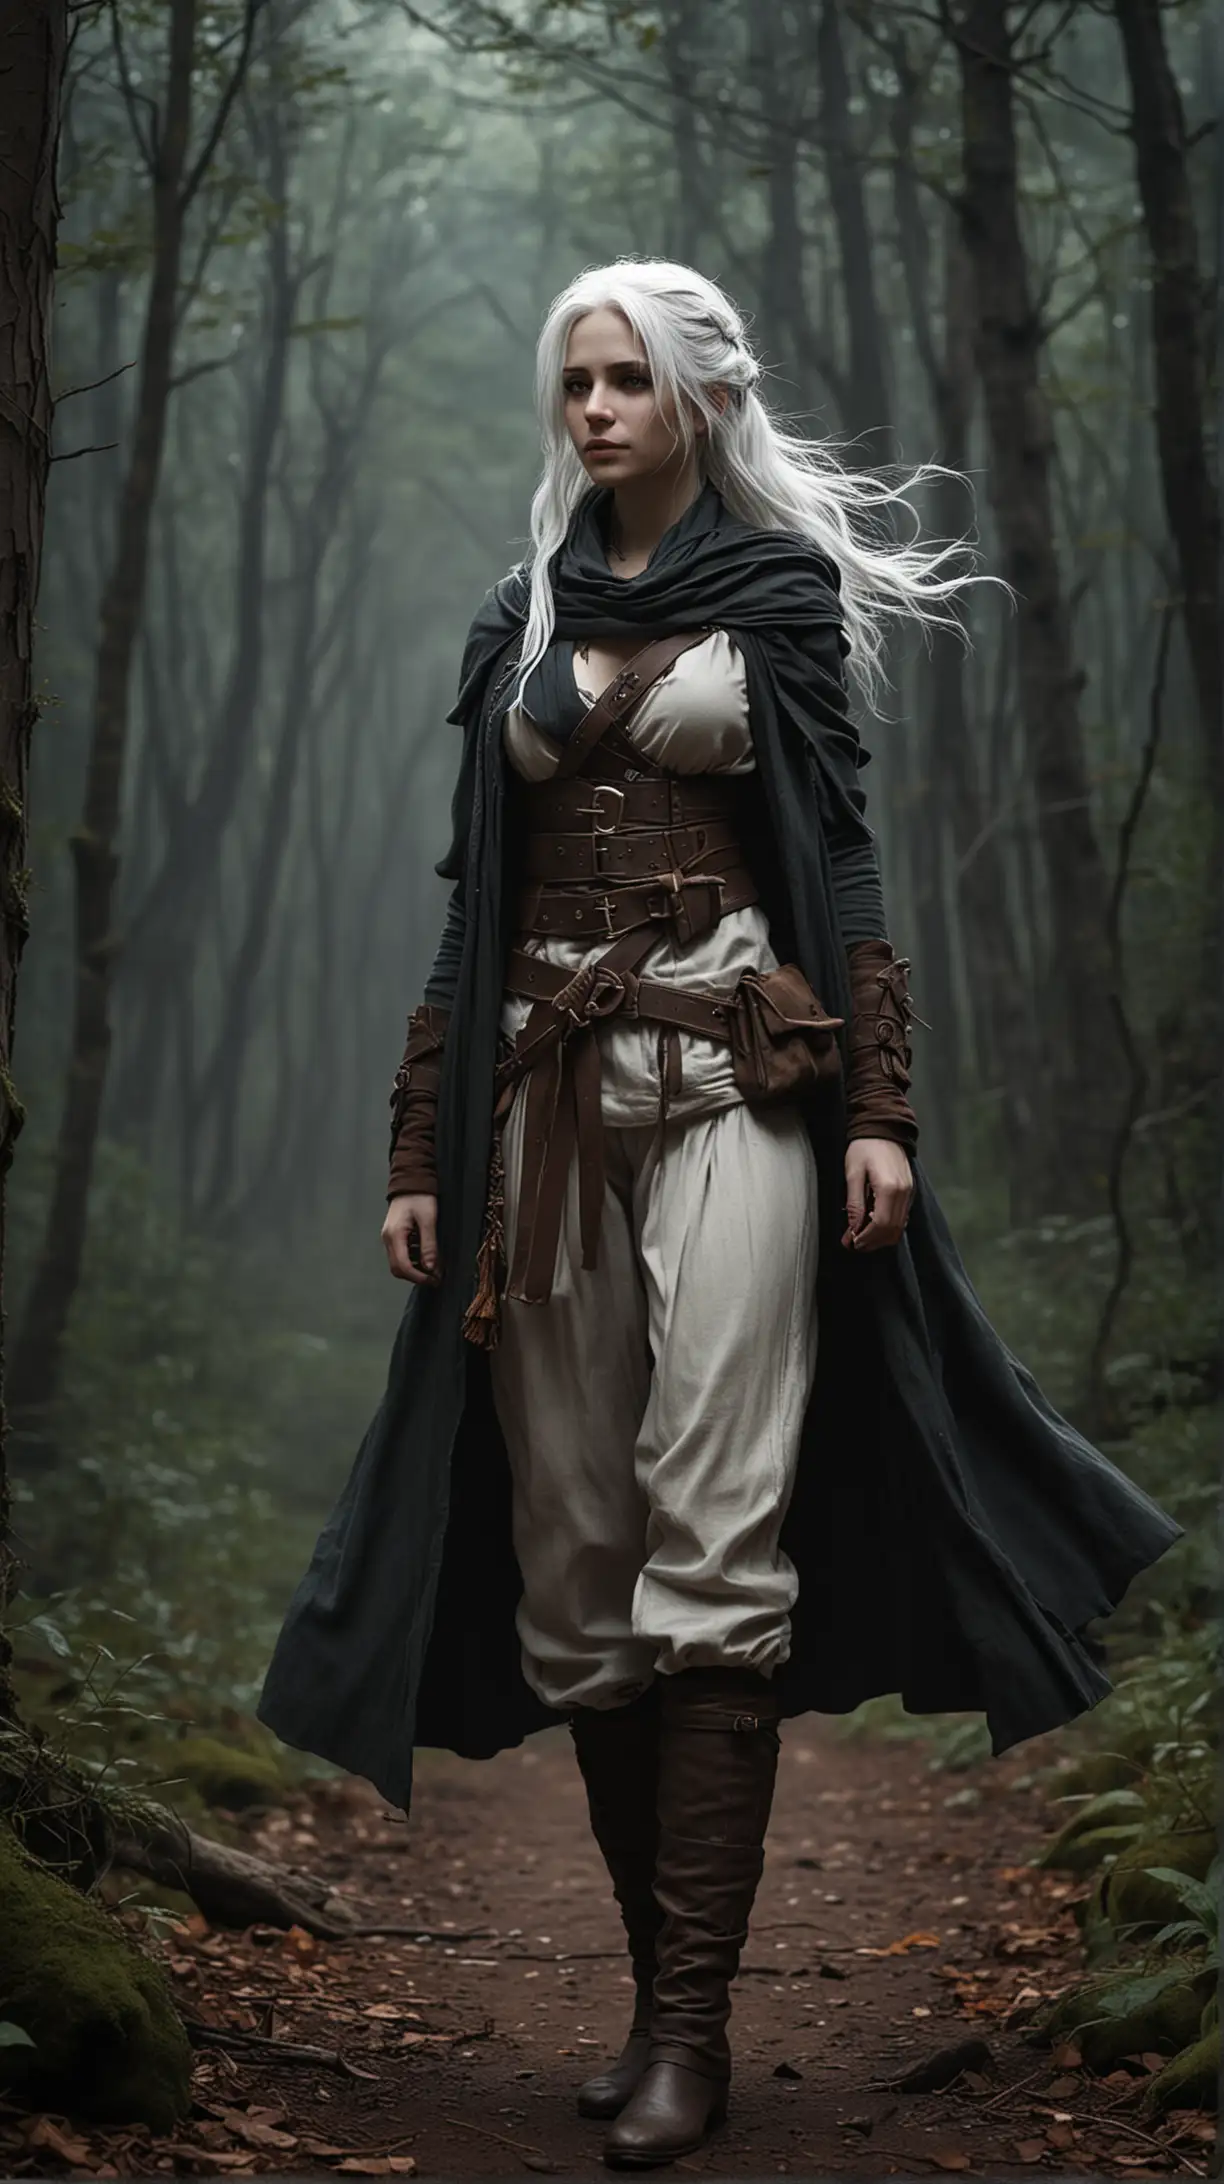 Fantasy Female Mage with White Hair in Shadowy Earthy Traveling Clothes